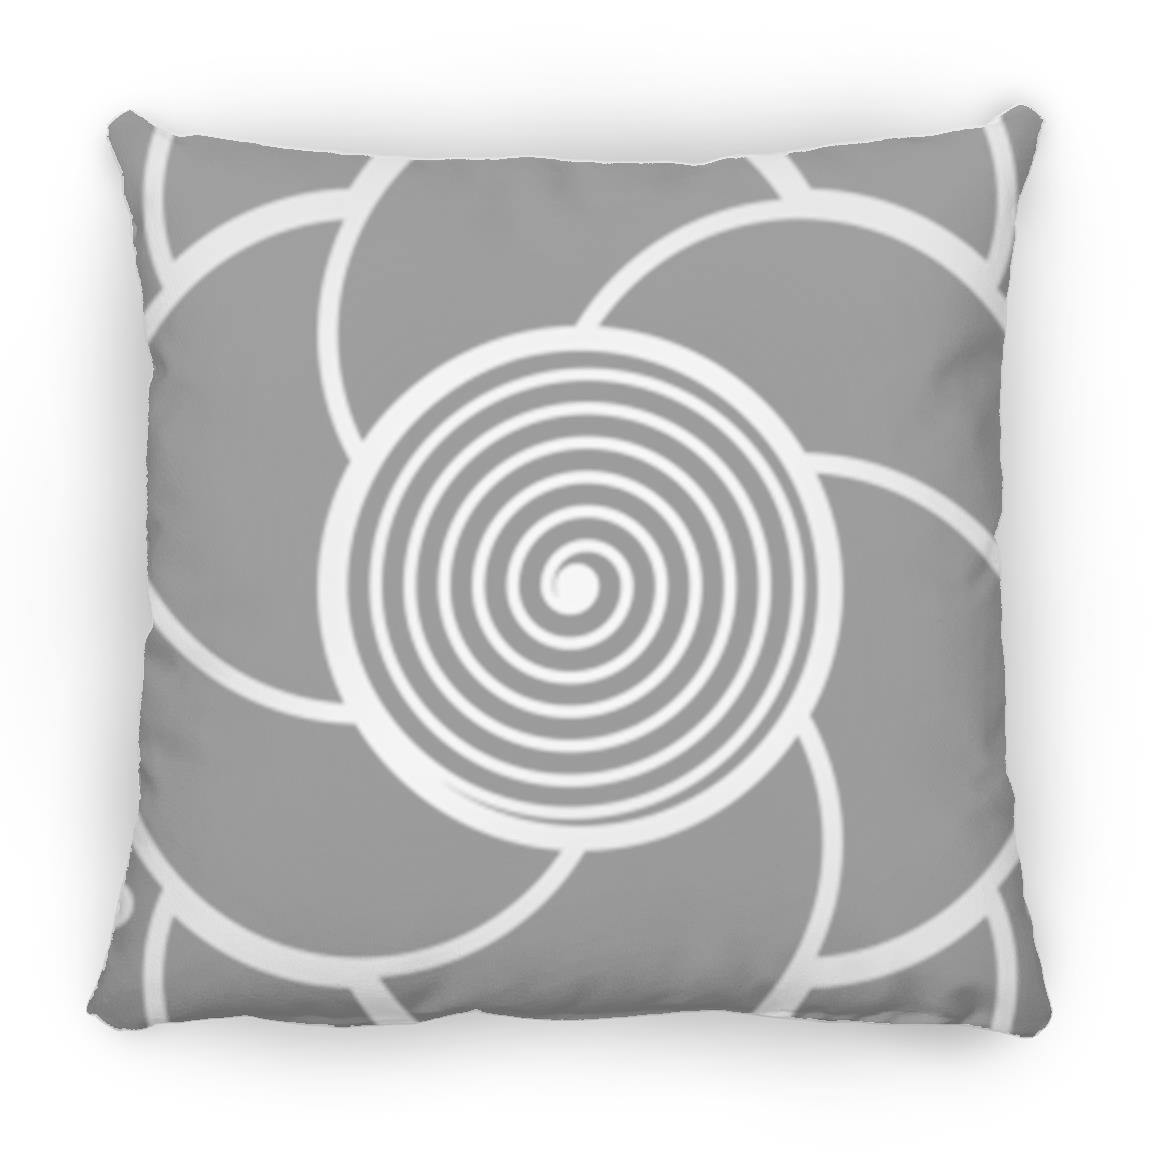 Crop Circle Pillow - Middle Woodford - Shapes of Wisdom